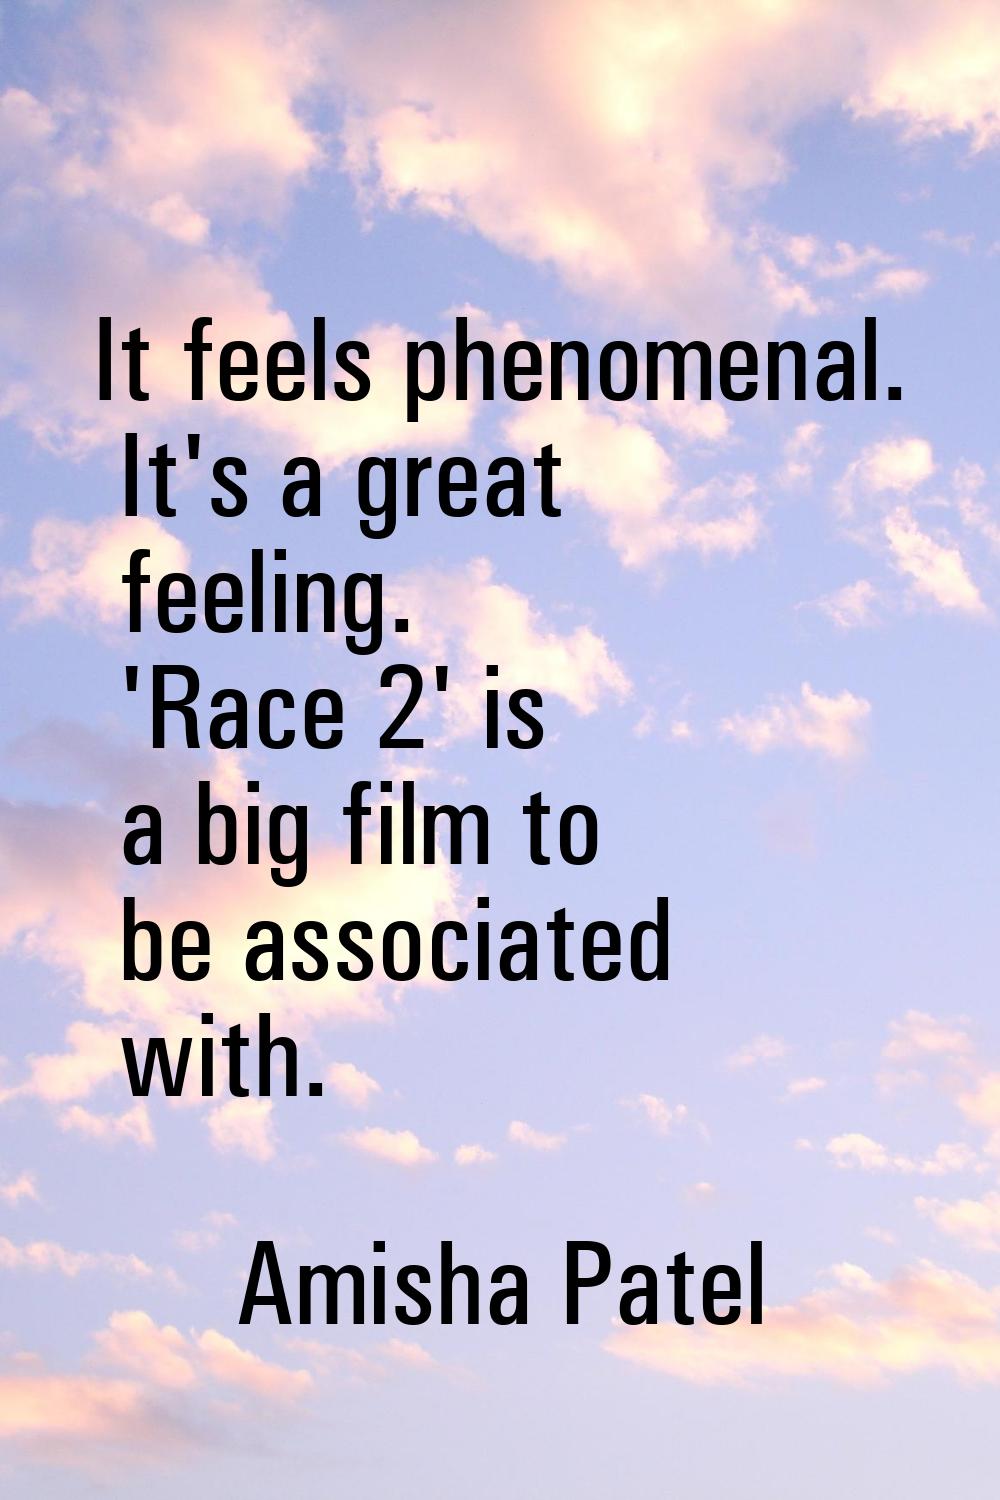 It feels phenomenal. It's a great feeling. 'Race 2' is a big film to be associated with.